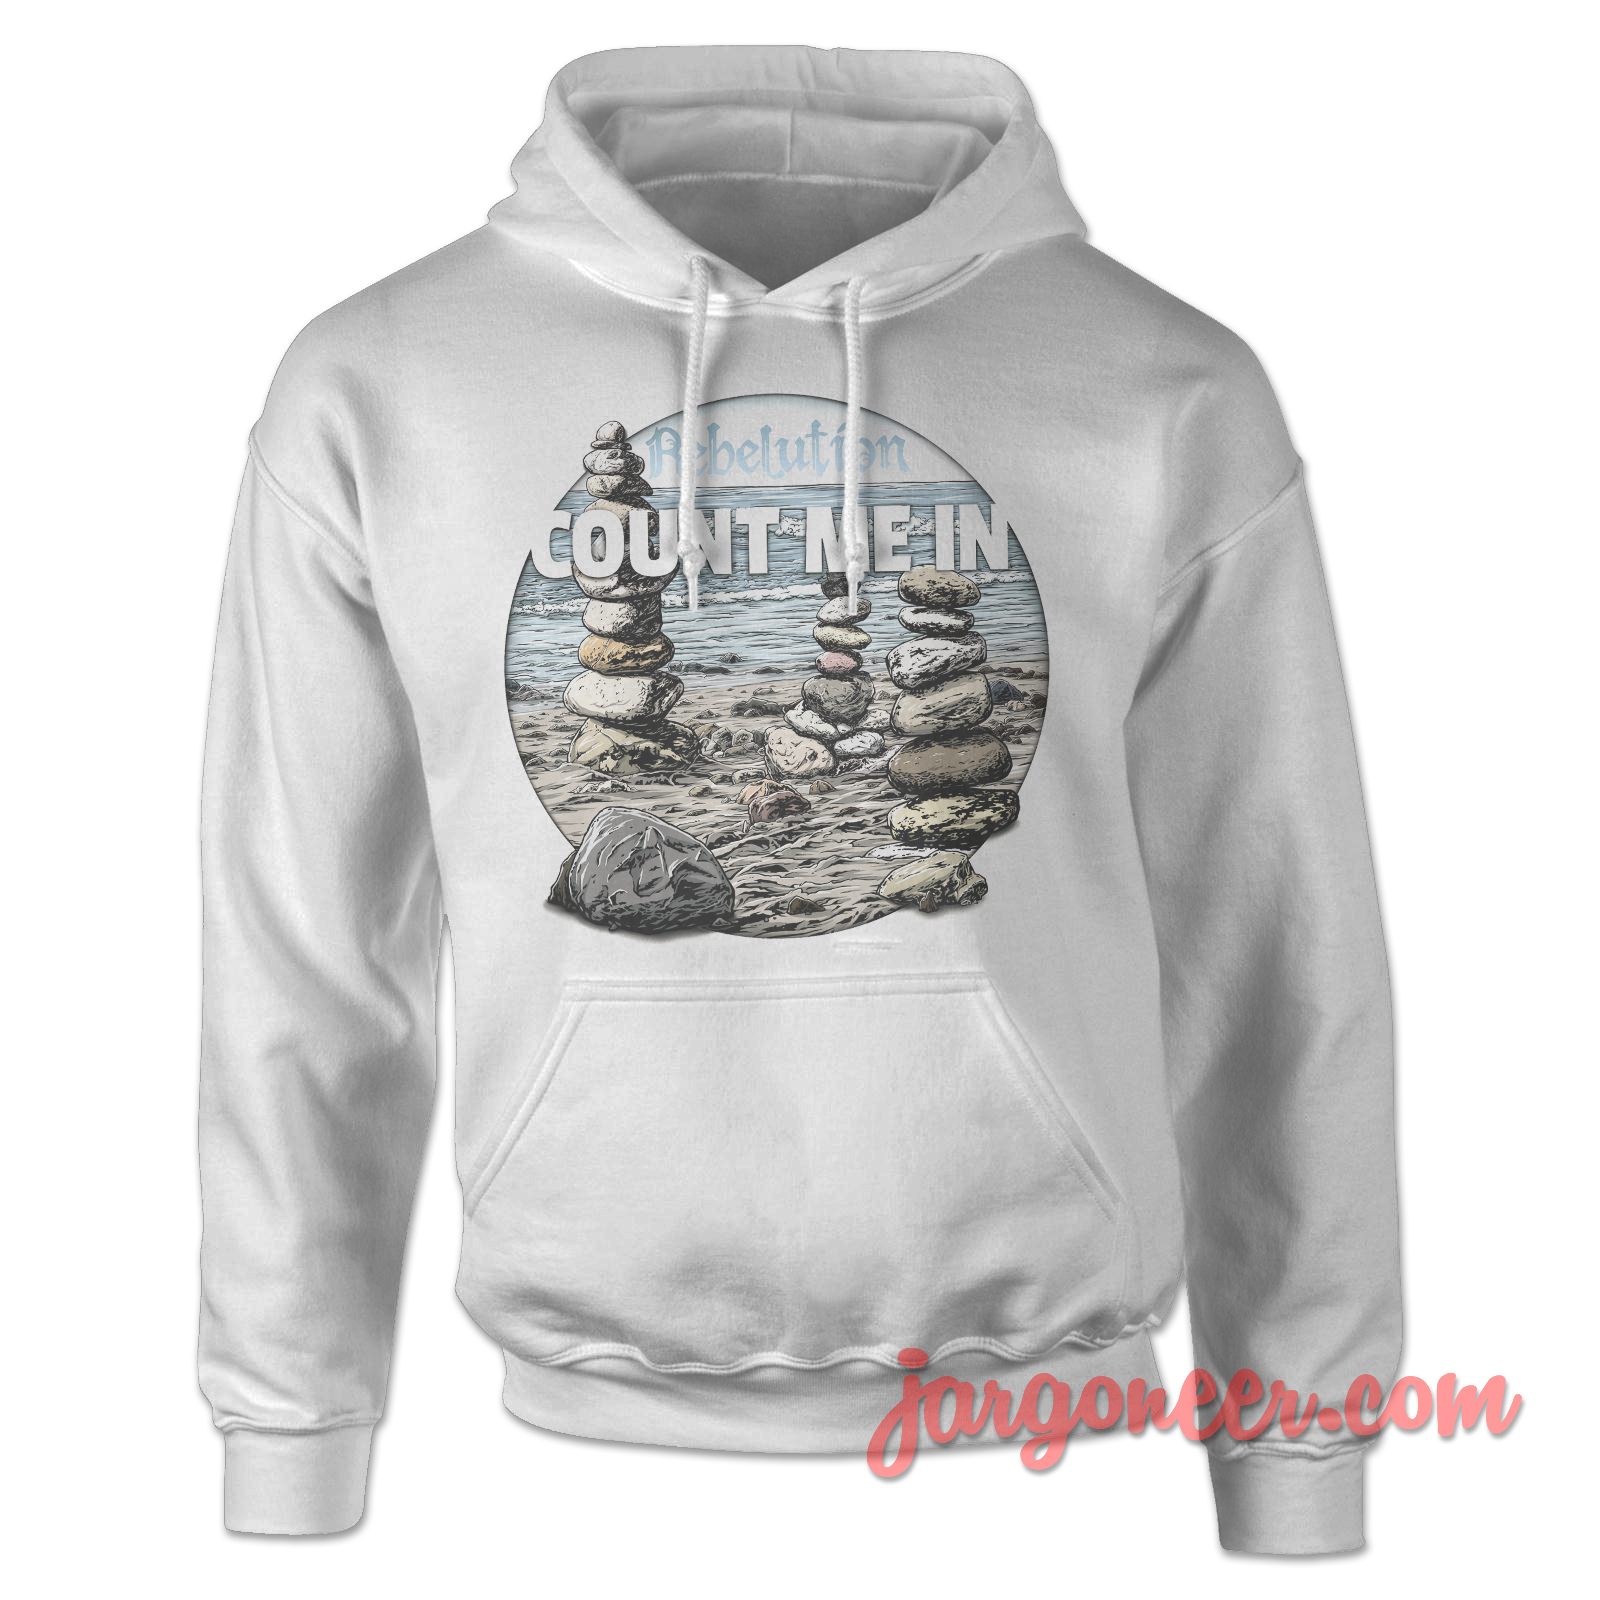 Rebelution Count Me In White Hoody - Shop Unique Graphic Cool Shirt Designs